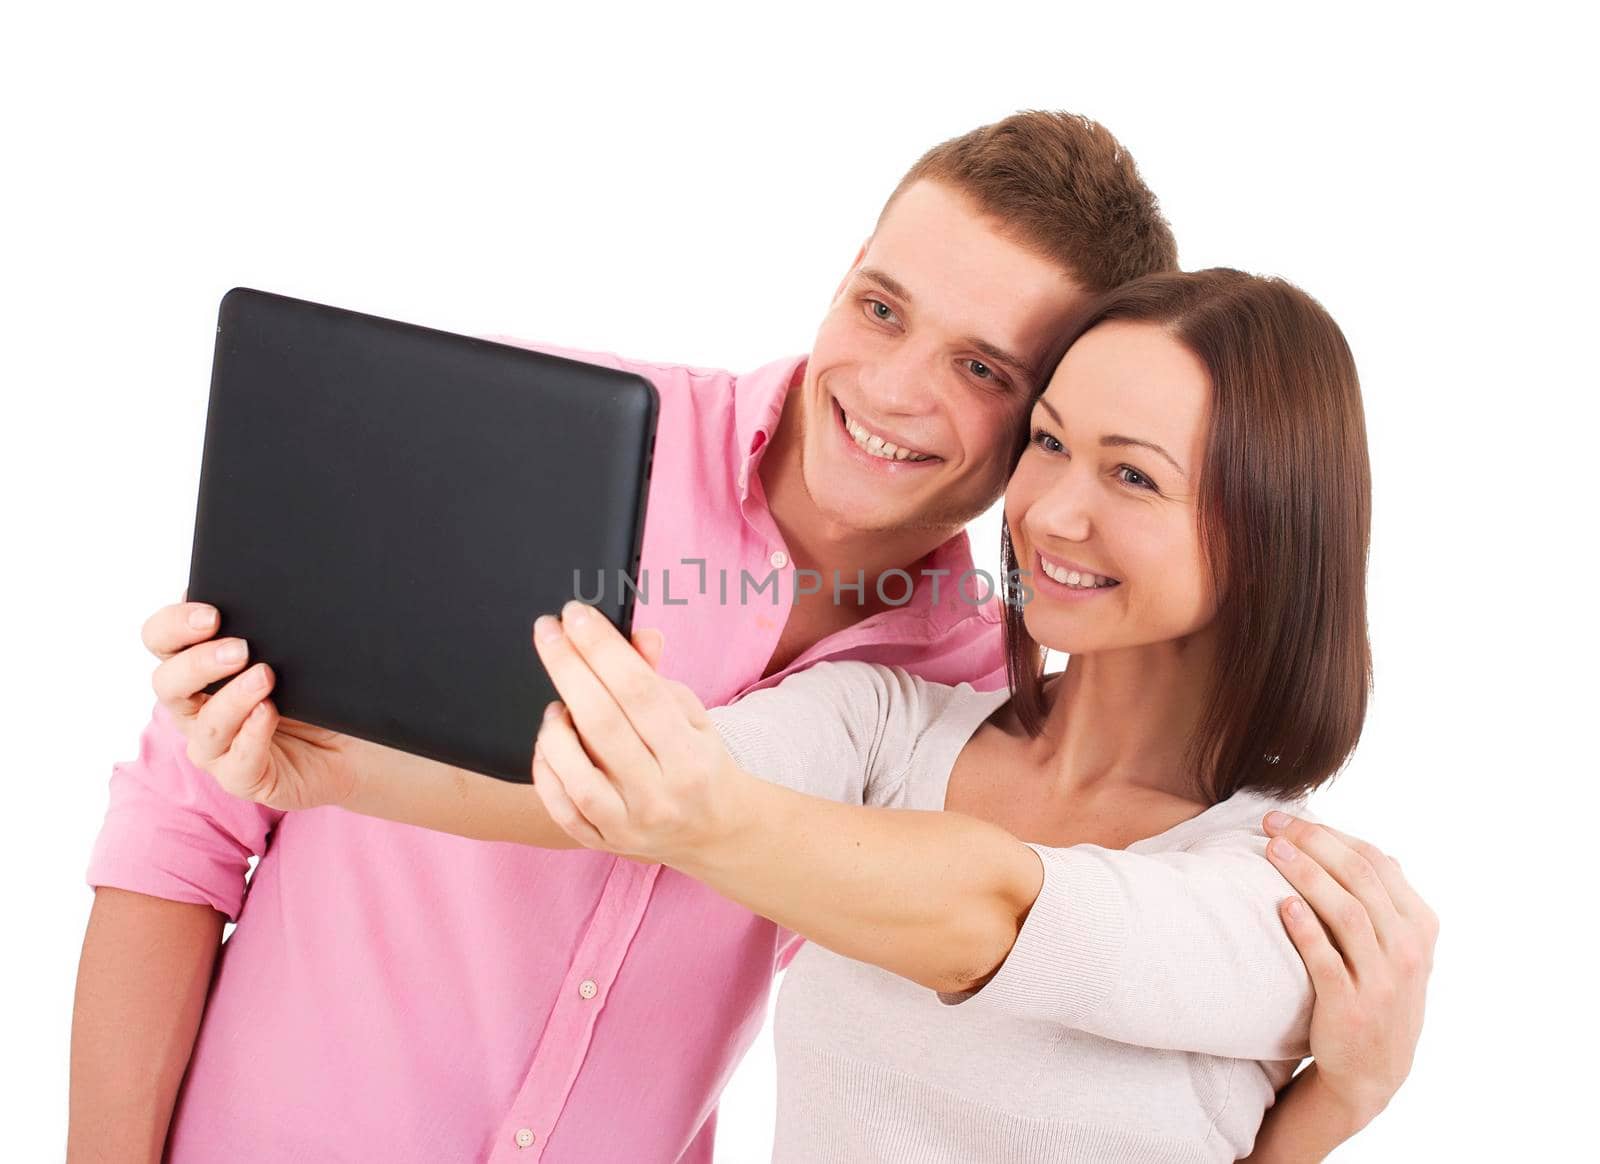 Attractive young couple taking a selfie together - Stock Image by Jyliana